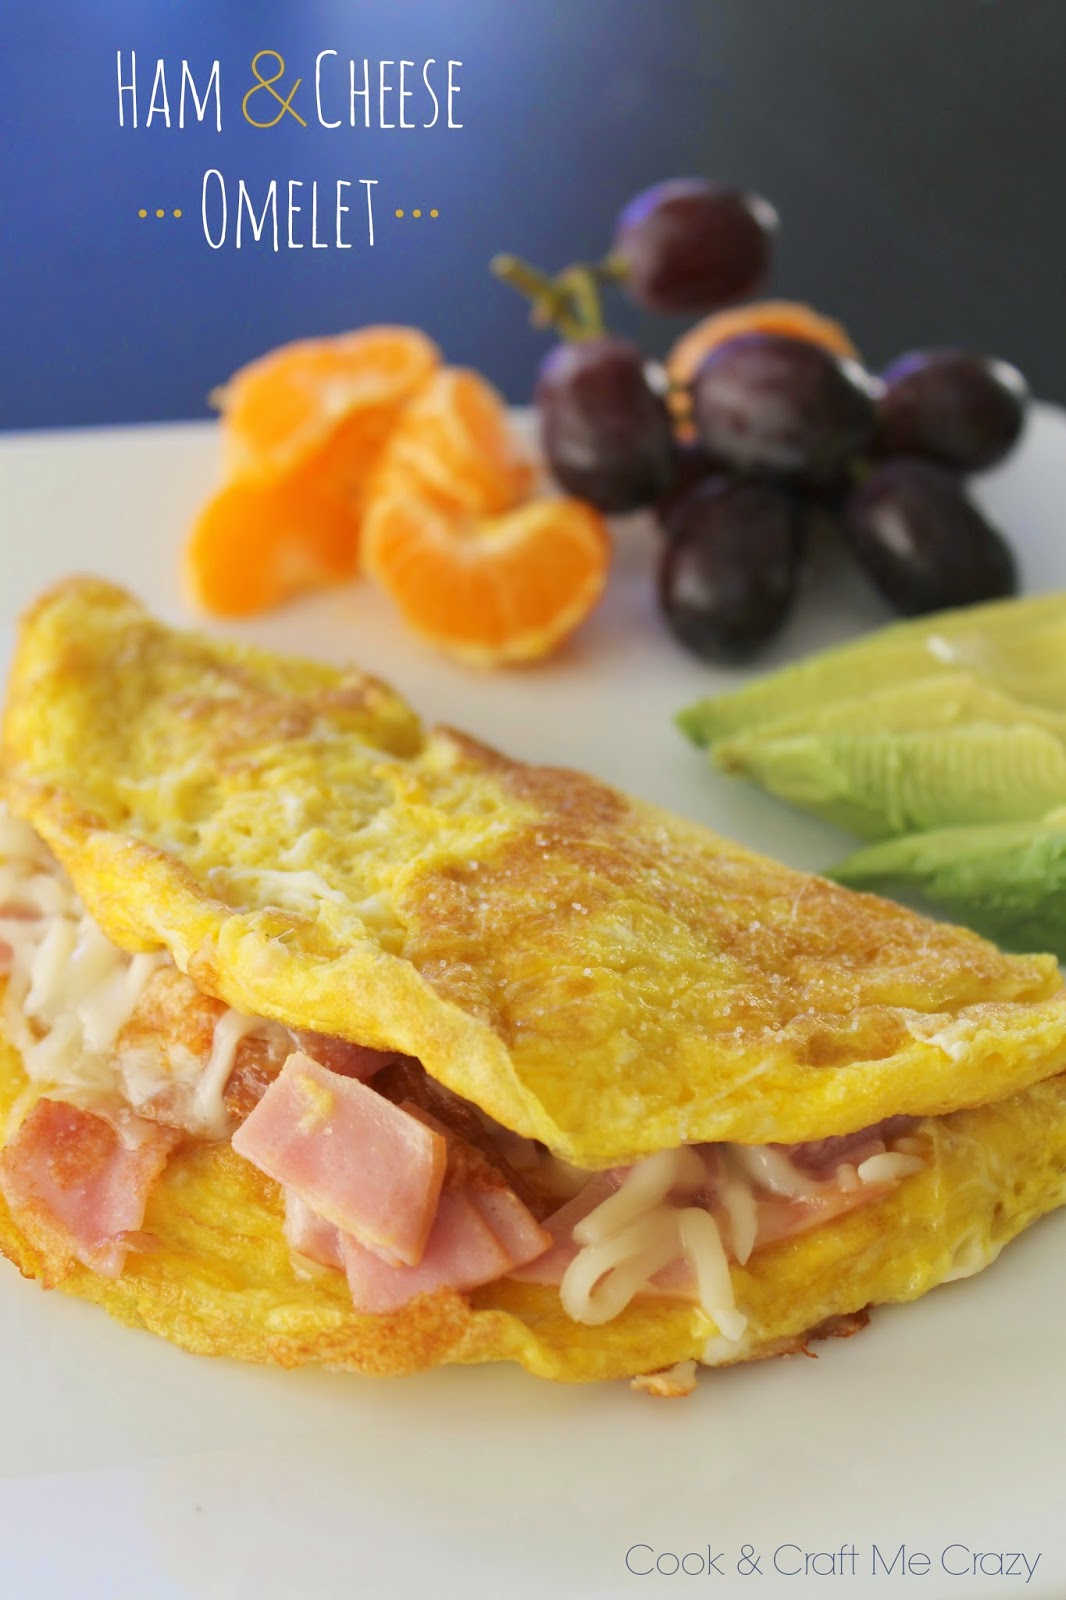 Cook and Craft Me Crazy: Ham & Cheese Omelet